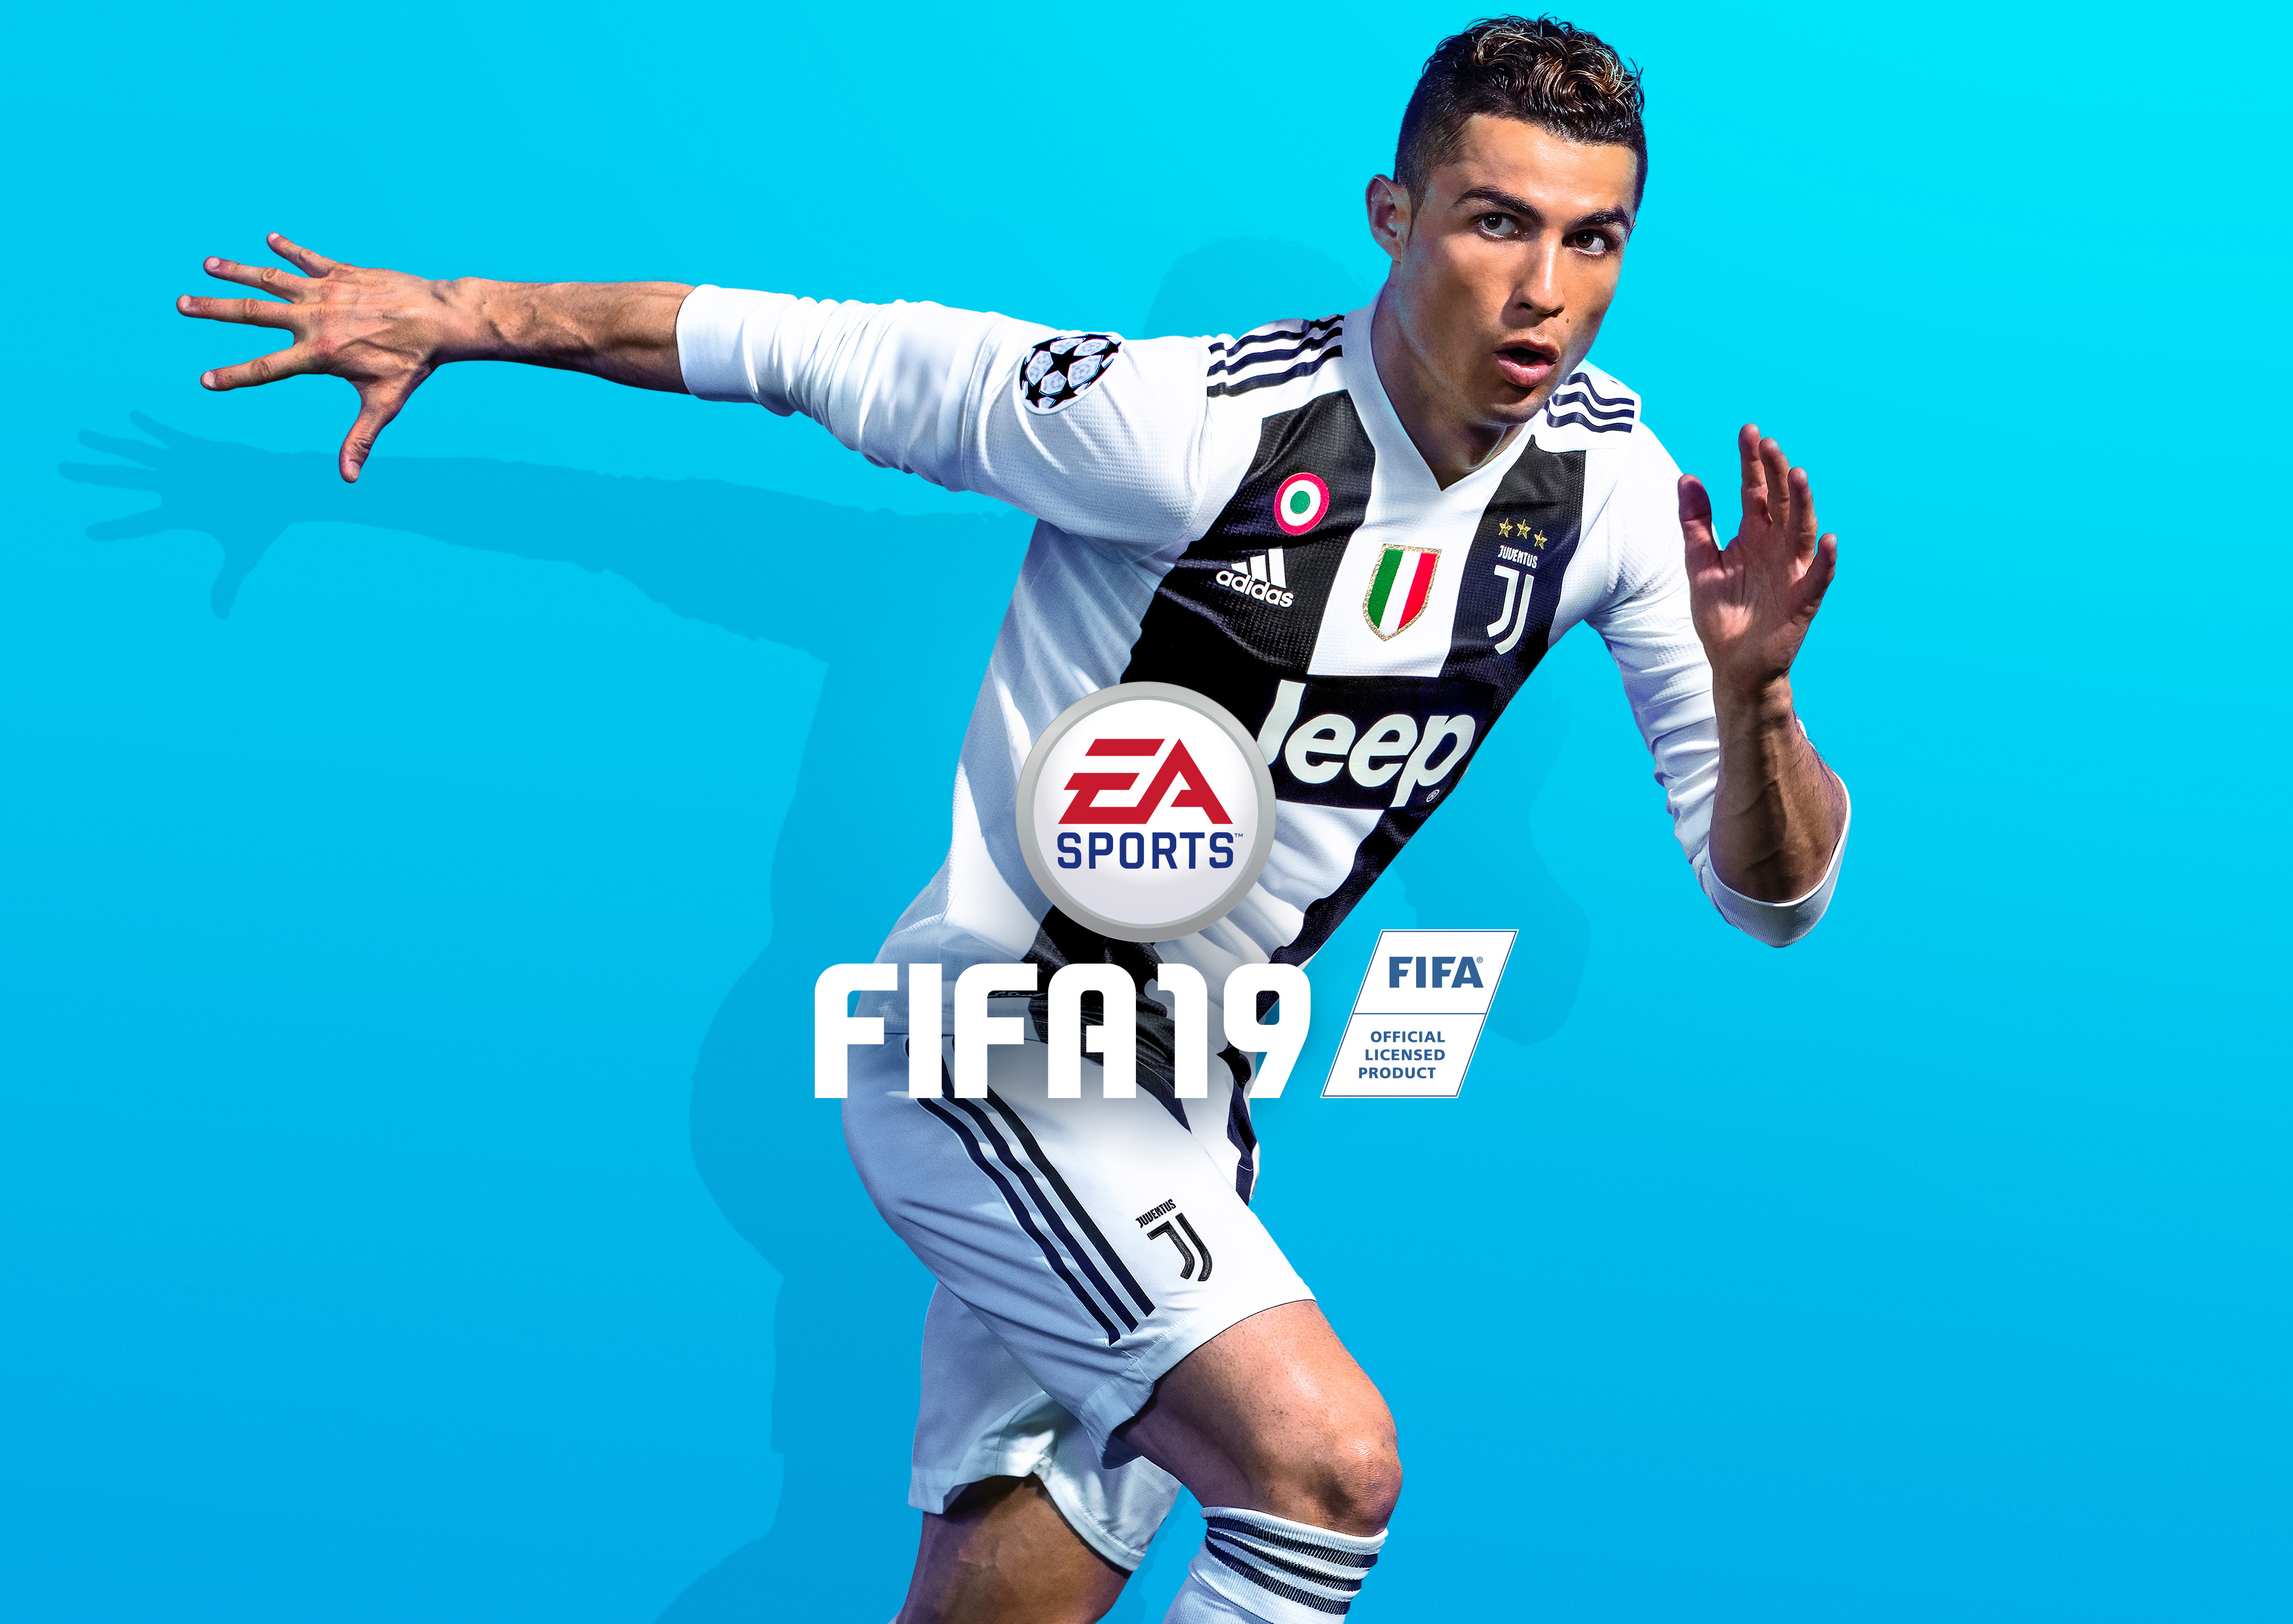 Champions Rise EA SPORTS FIFA 19 Worldwide Today | Wire